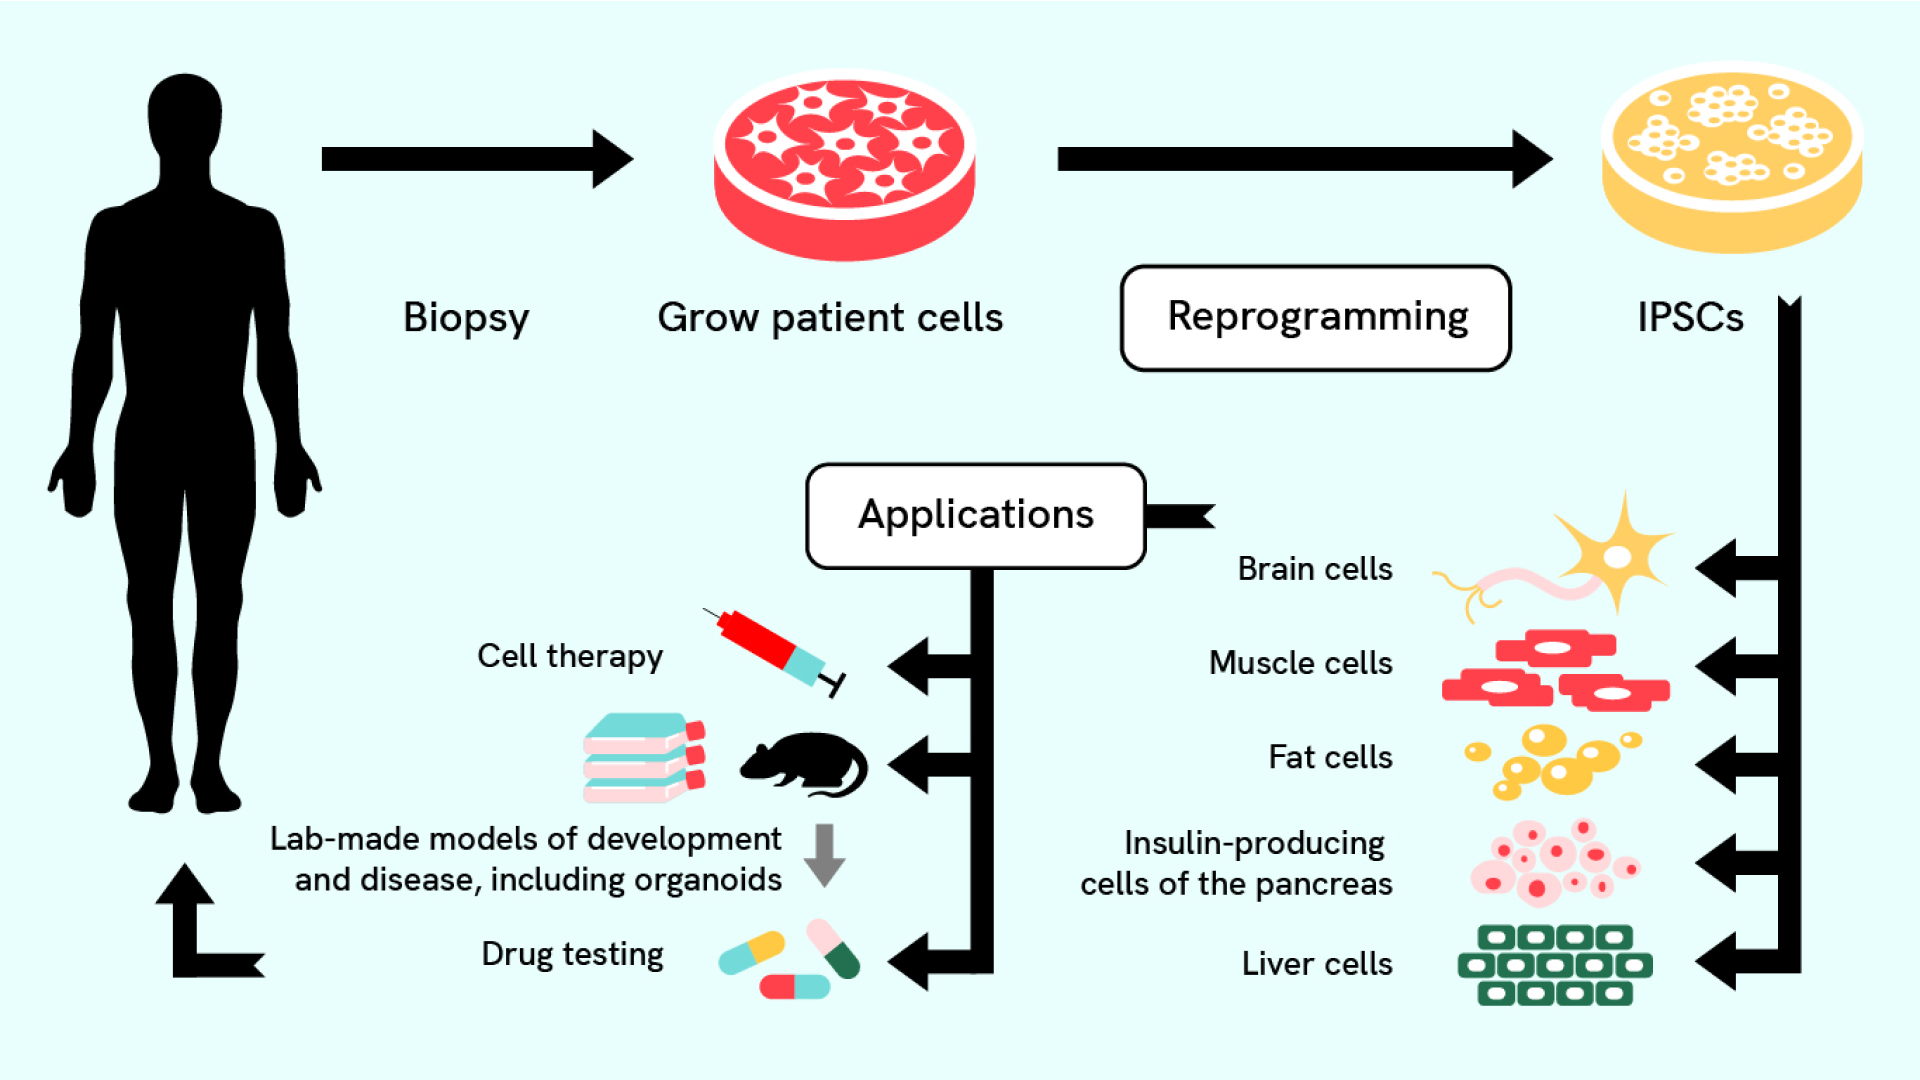 Flow chart showing how iPSCs are made, starting from a biopsy of patient tissue, then cells grown in a dish being reprogrammed, then matured further in a dish to any type of cell for example brain cells, muscle cells, fat cells, insulin-producing cells of the pancreas, or liver cells. Applications shown include lab-made models of development and disease, including organoids, which can be used for drug testing. Or cell therapy, which can be transplanted back into the patient.